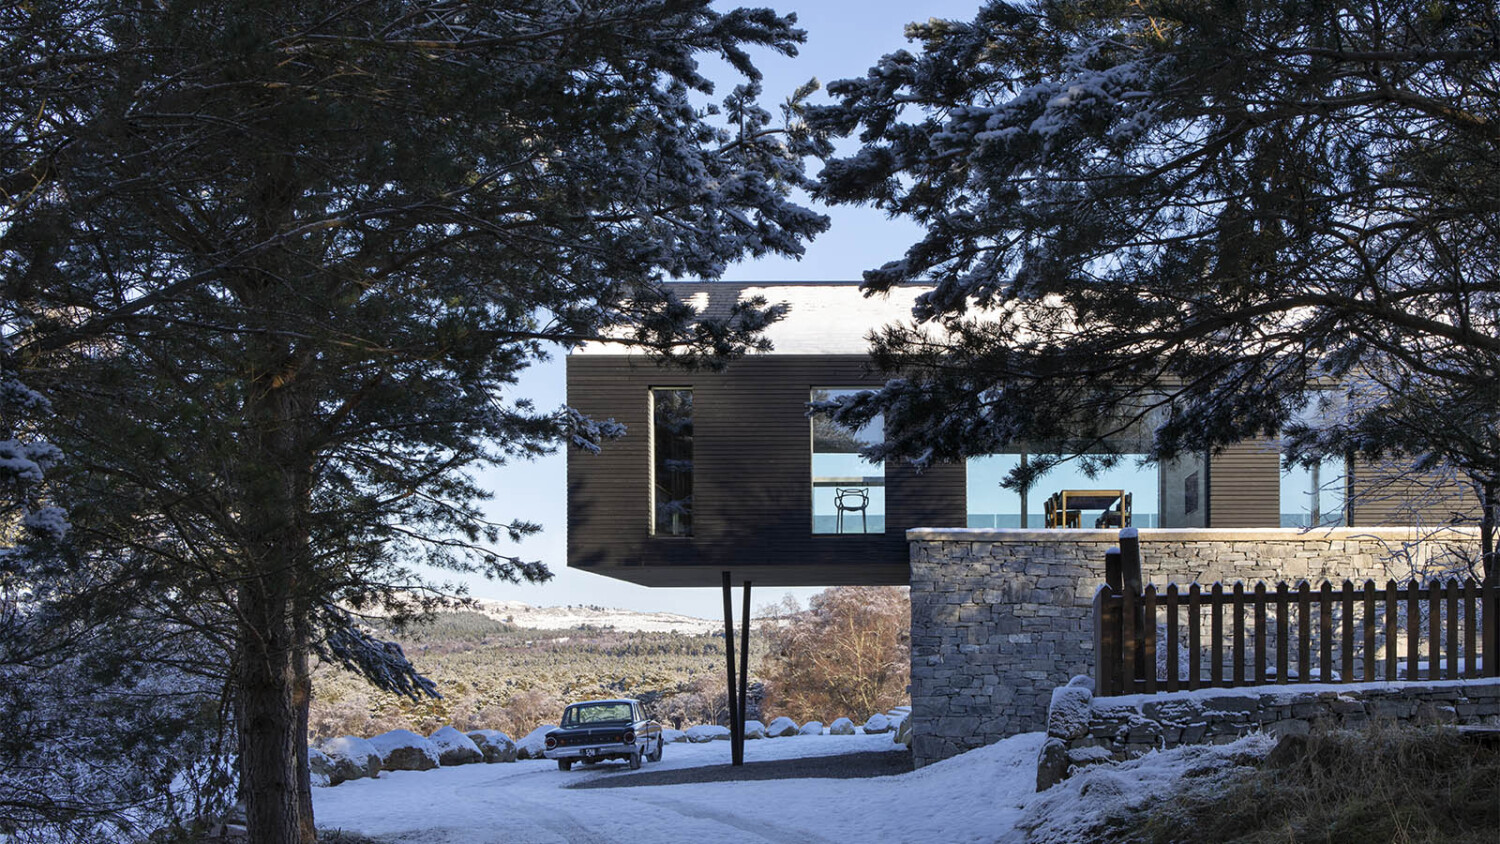 Glasgow Based Photographer Gillian Hayes Photographs a Home in the Heart of Cairngorms National Park